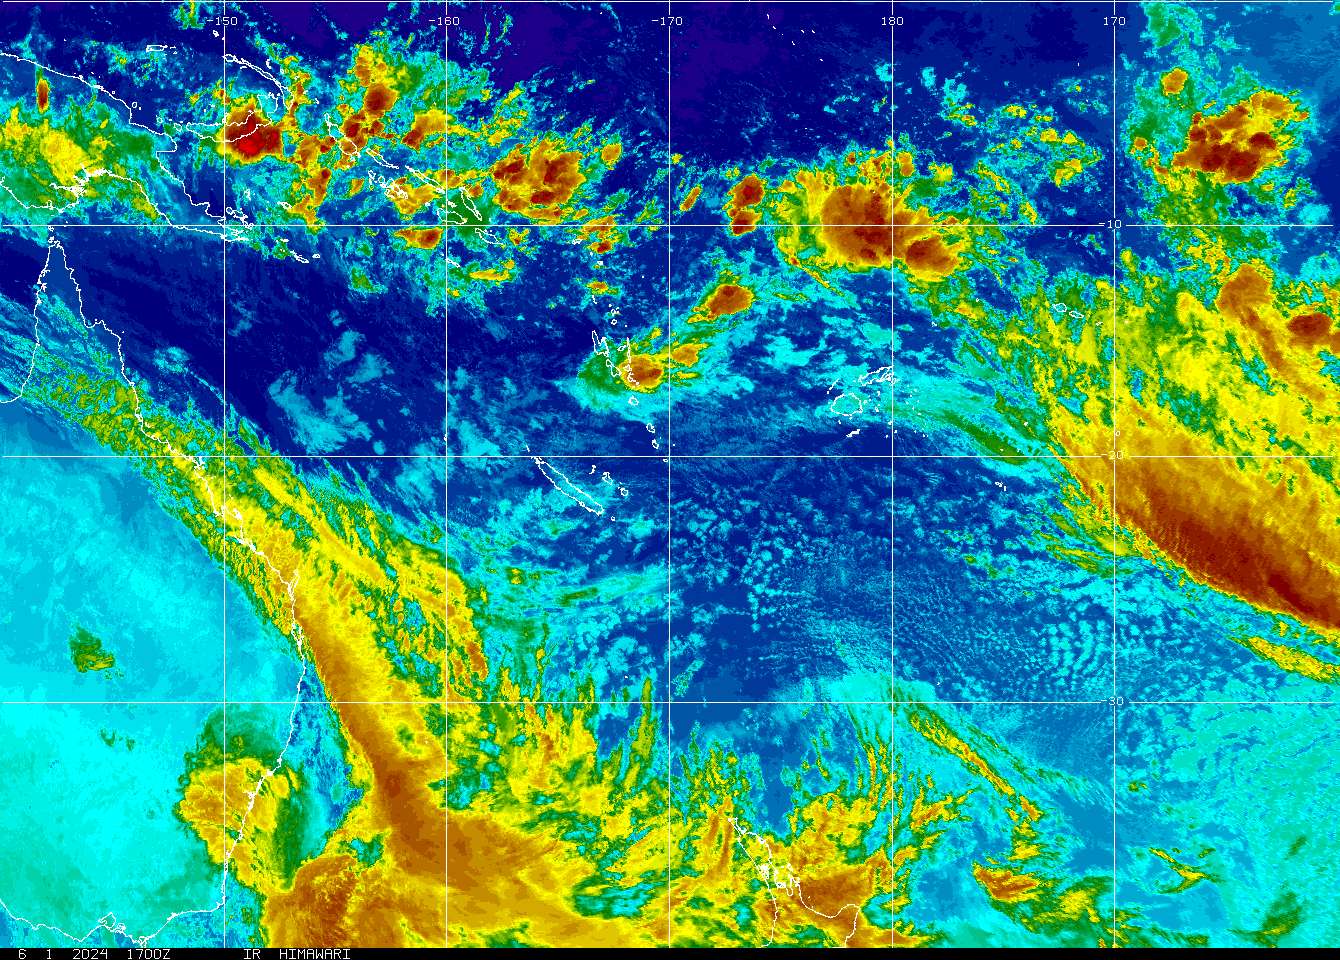 NOAA GOES - Southwest Pacific